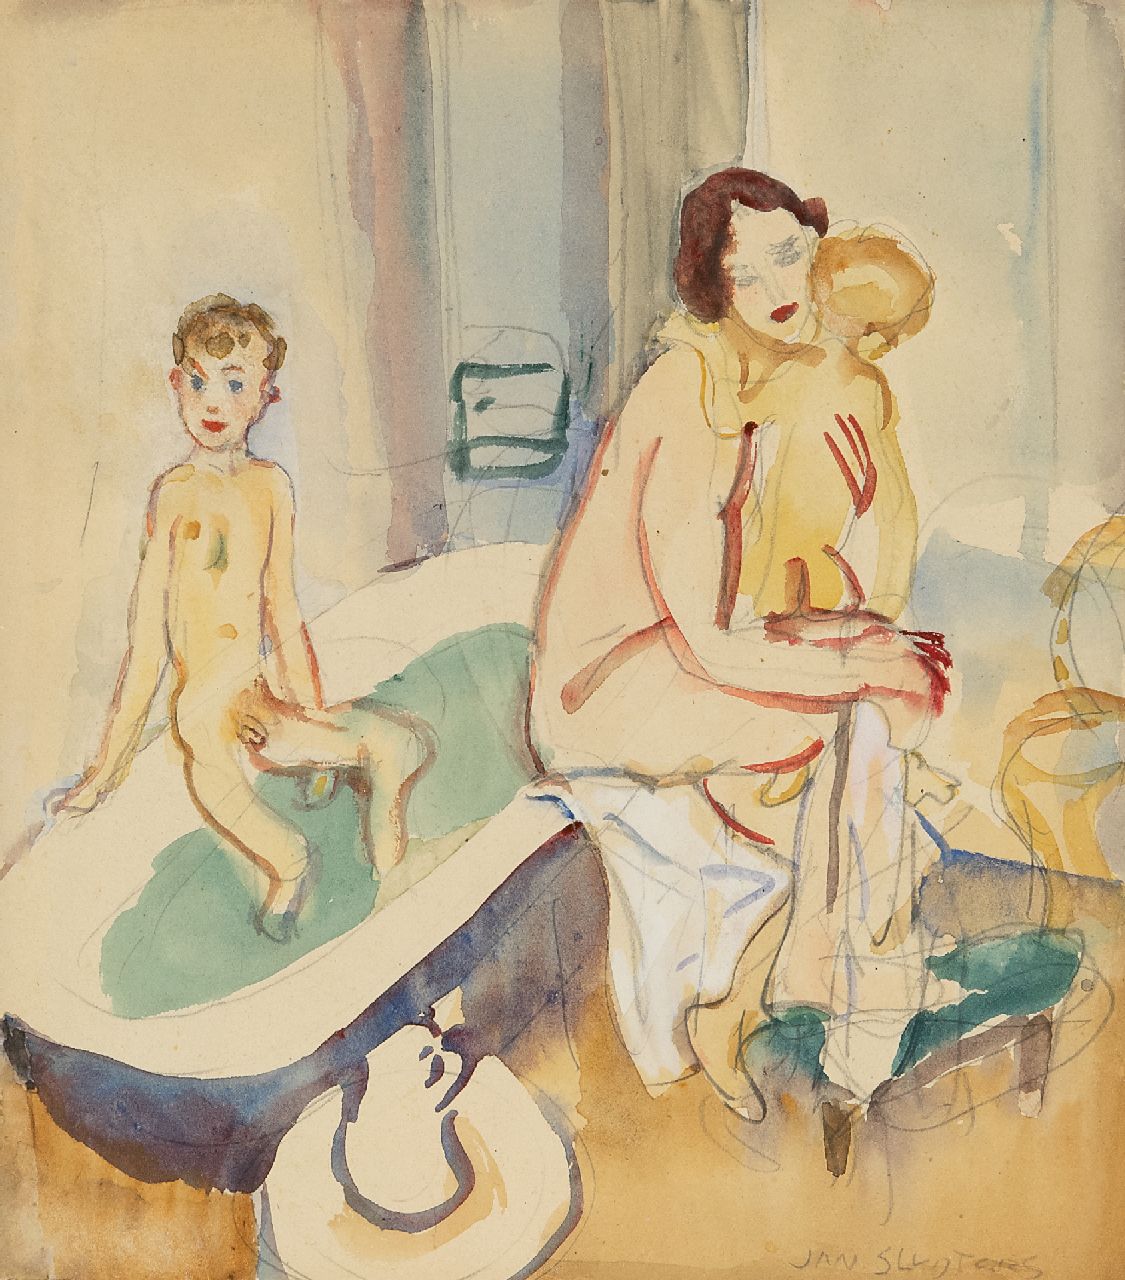 Sluijters J.C.B.  | Johannes Carolus Bernardus 'Jan' Sluijters | Watercolours and drawings offered for sale | The bathroom (the artist's wife with Liesje and Jan jr.), pencil and watercolour on paper 21.7 x 19.4 cm, signed l.r. and painted ca. 1949